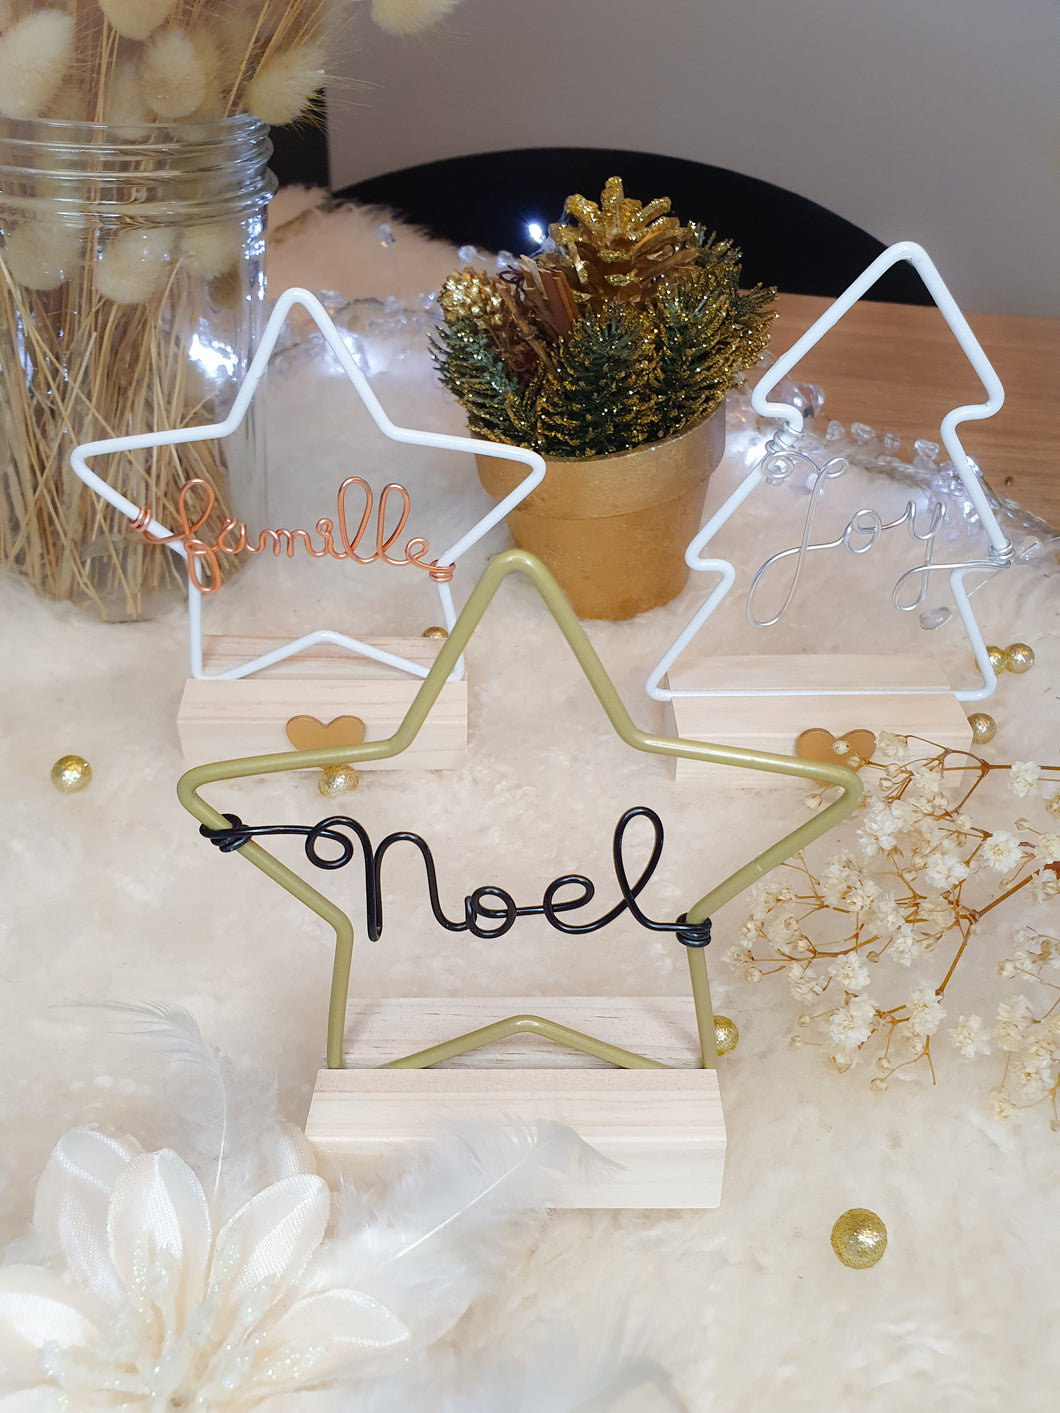 Personalized star or Christmas tree decoration with first name or word to hang or place end-of-year guest gift Christmas table place marker